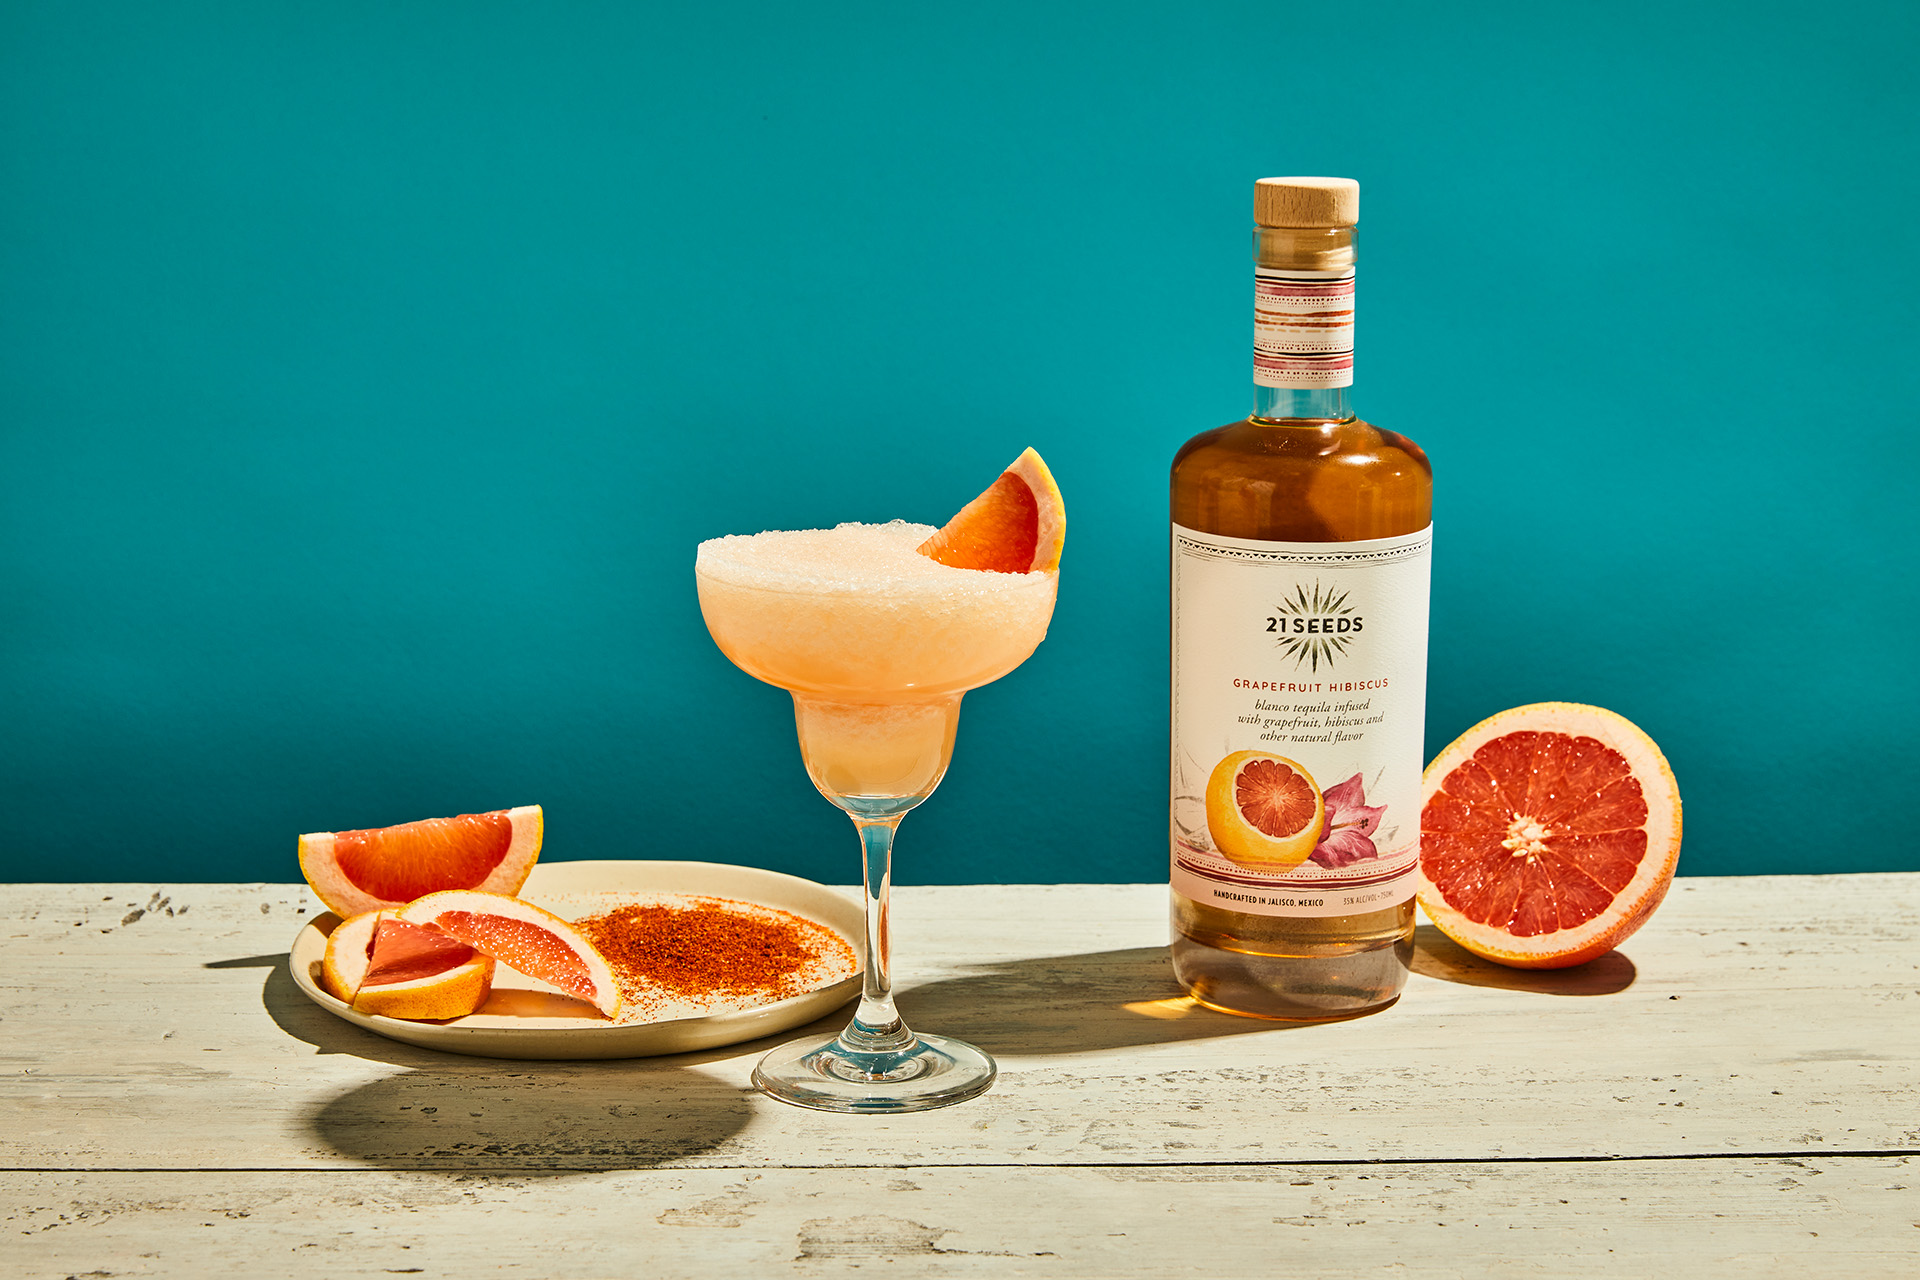 A frozen paloma cocktail in front of a bottle of 21Seeds Grapefruit Hibiscus Infused Tequila